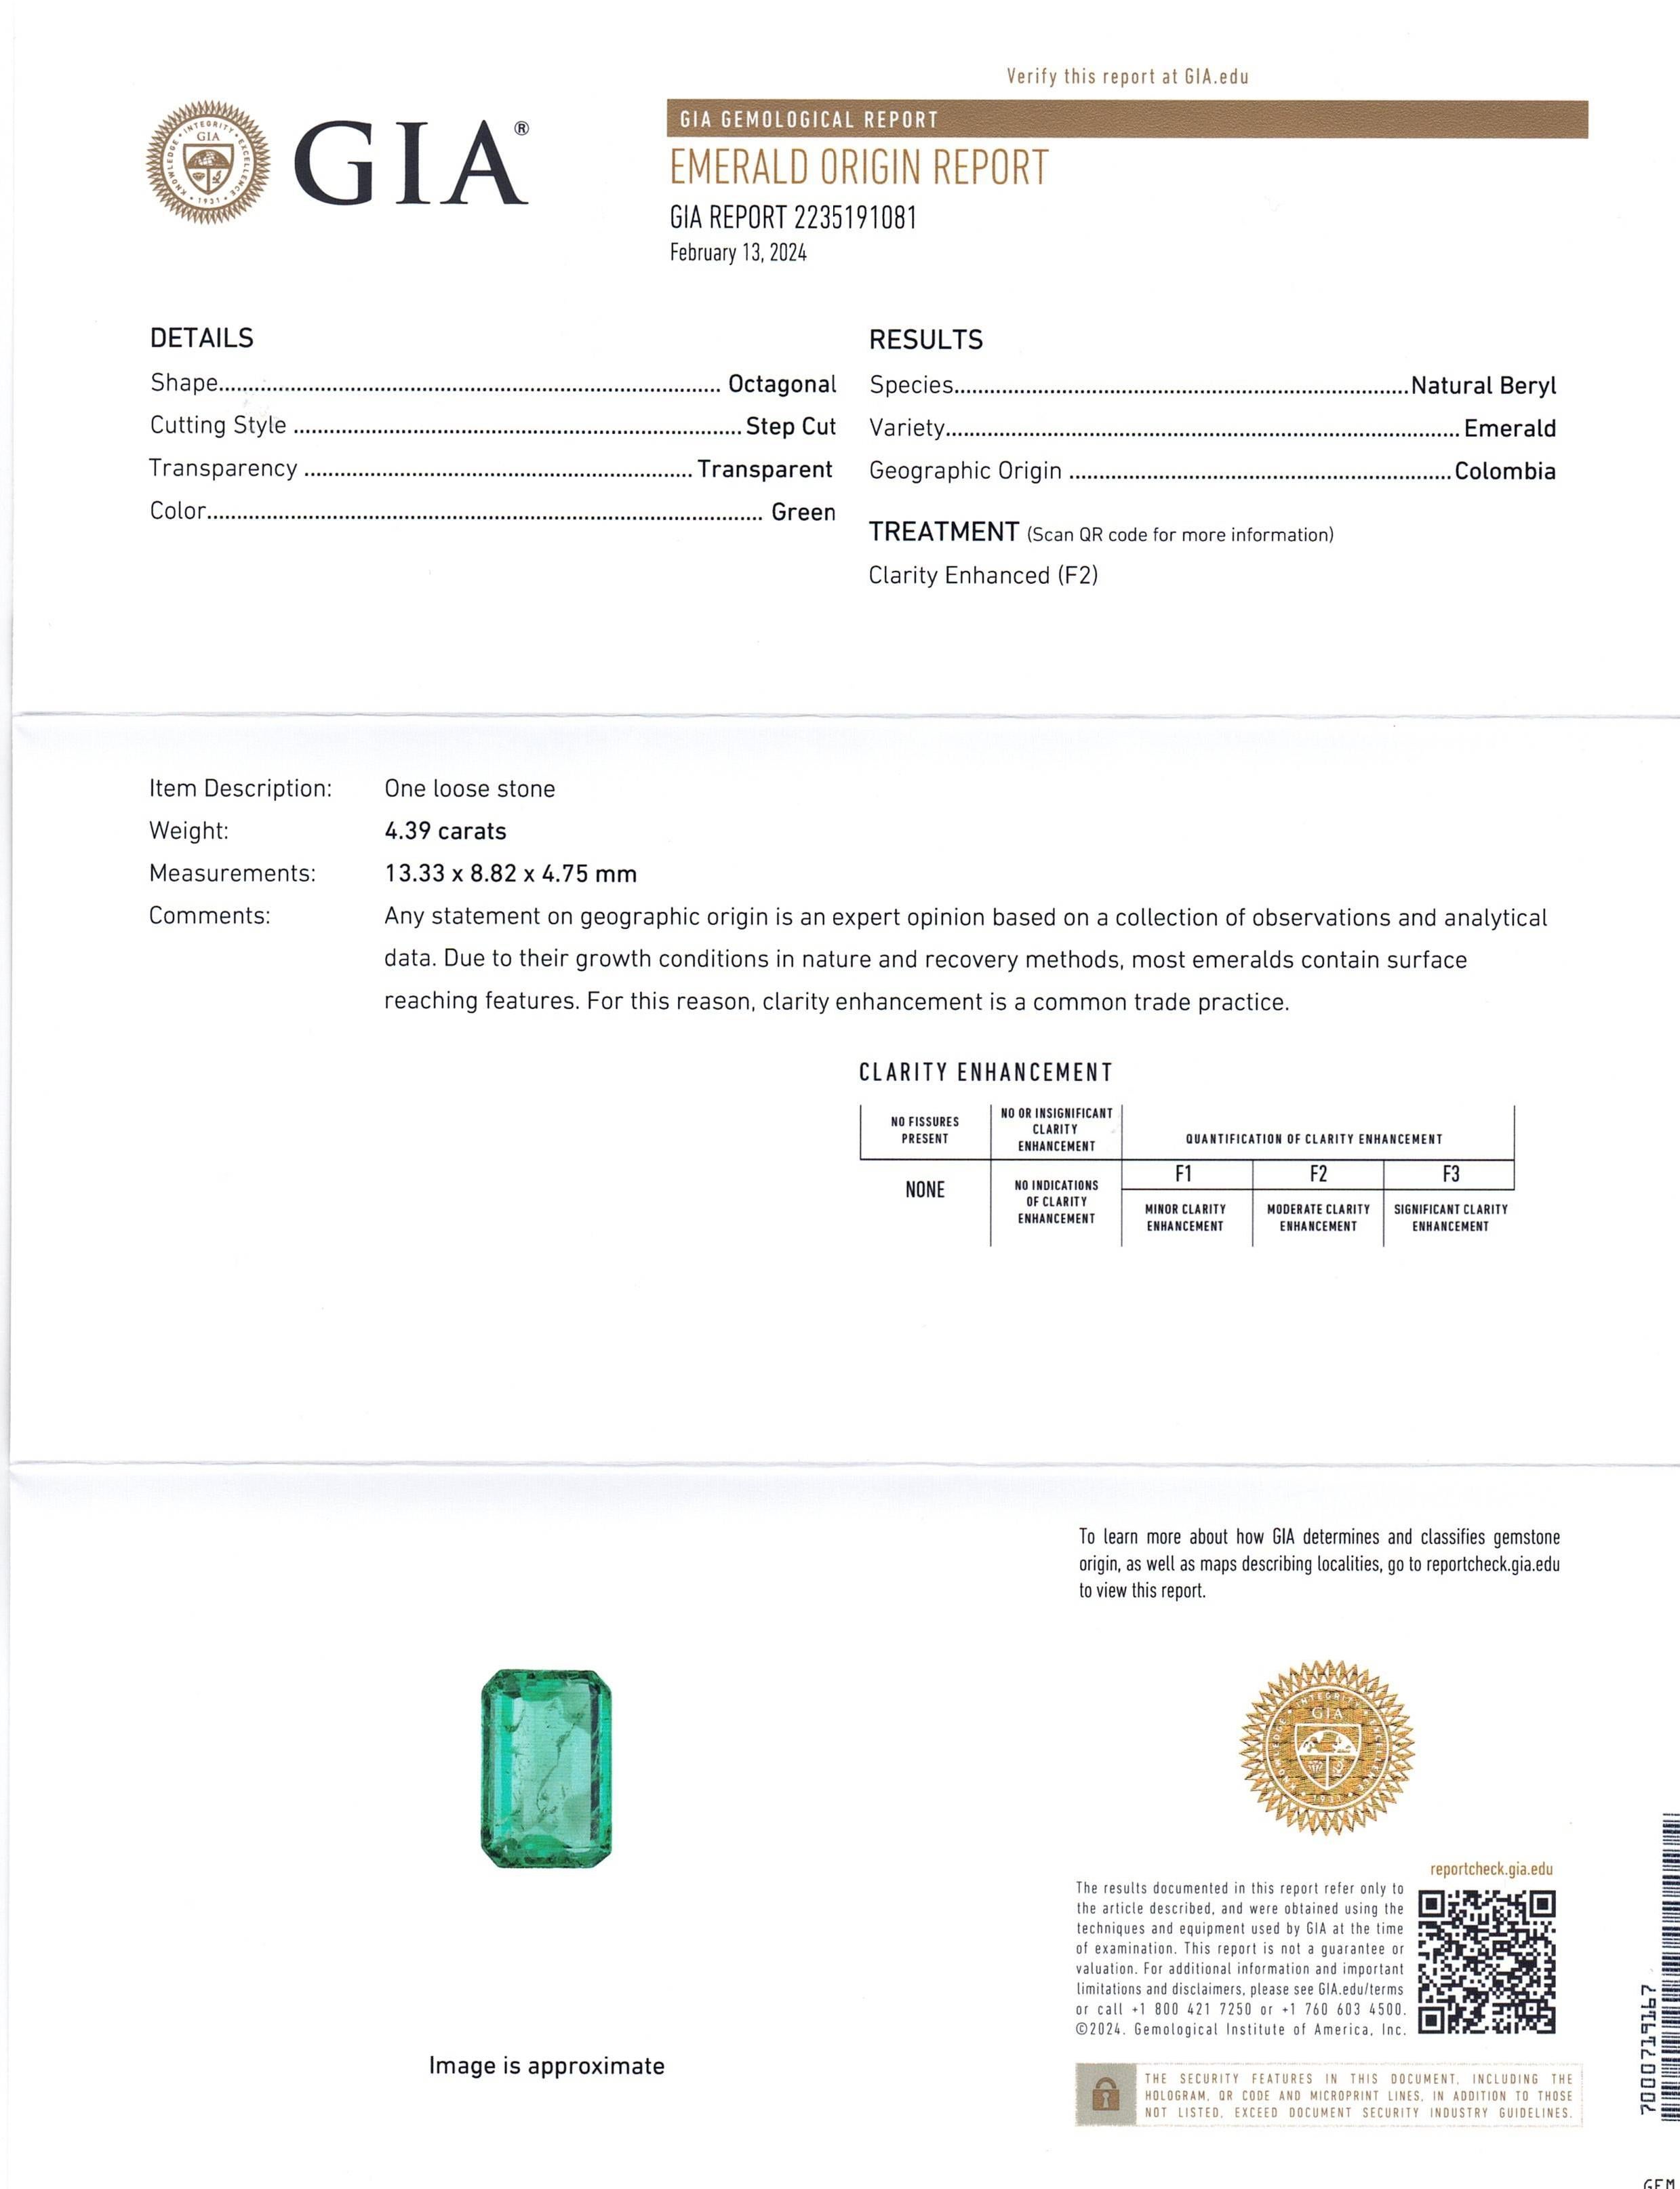 This is a stunning GIA Certified Emerald 


The GIA report reads as follows:

GIA Report Number: 2235191081
Shape: Octagonal
Cutting Style: Step Cut
Cutting Style: Crown: 
Cutting Style: Pavilion: 
Transparency: Transparent
Colour: